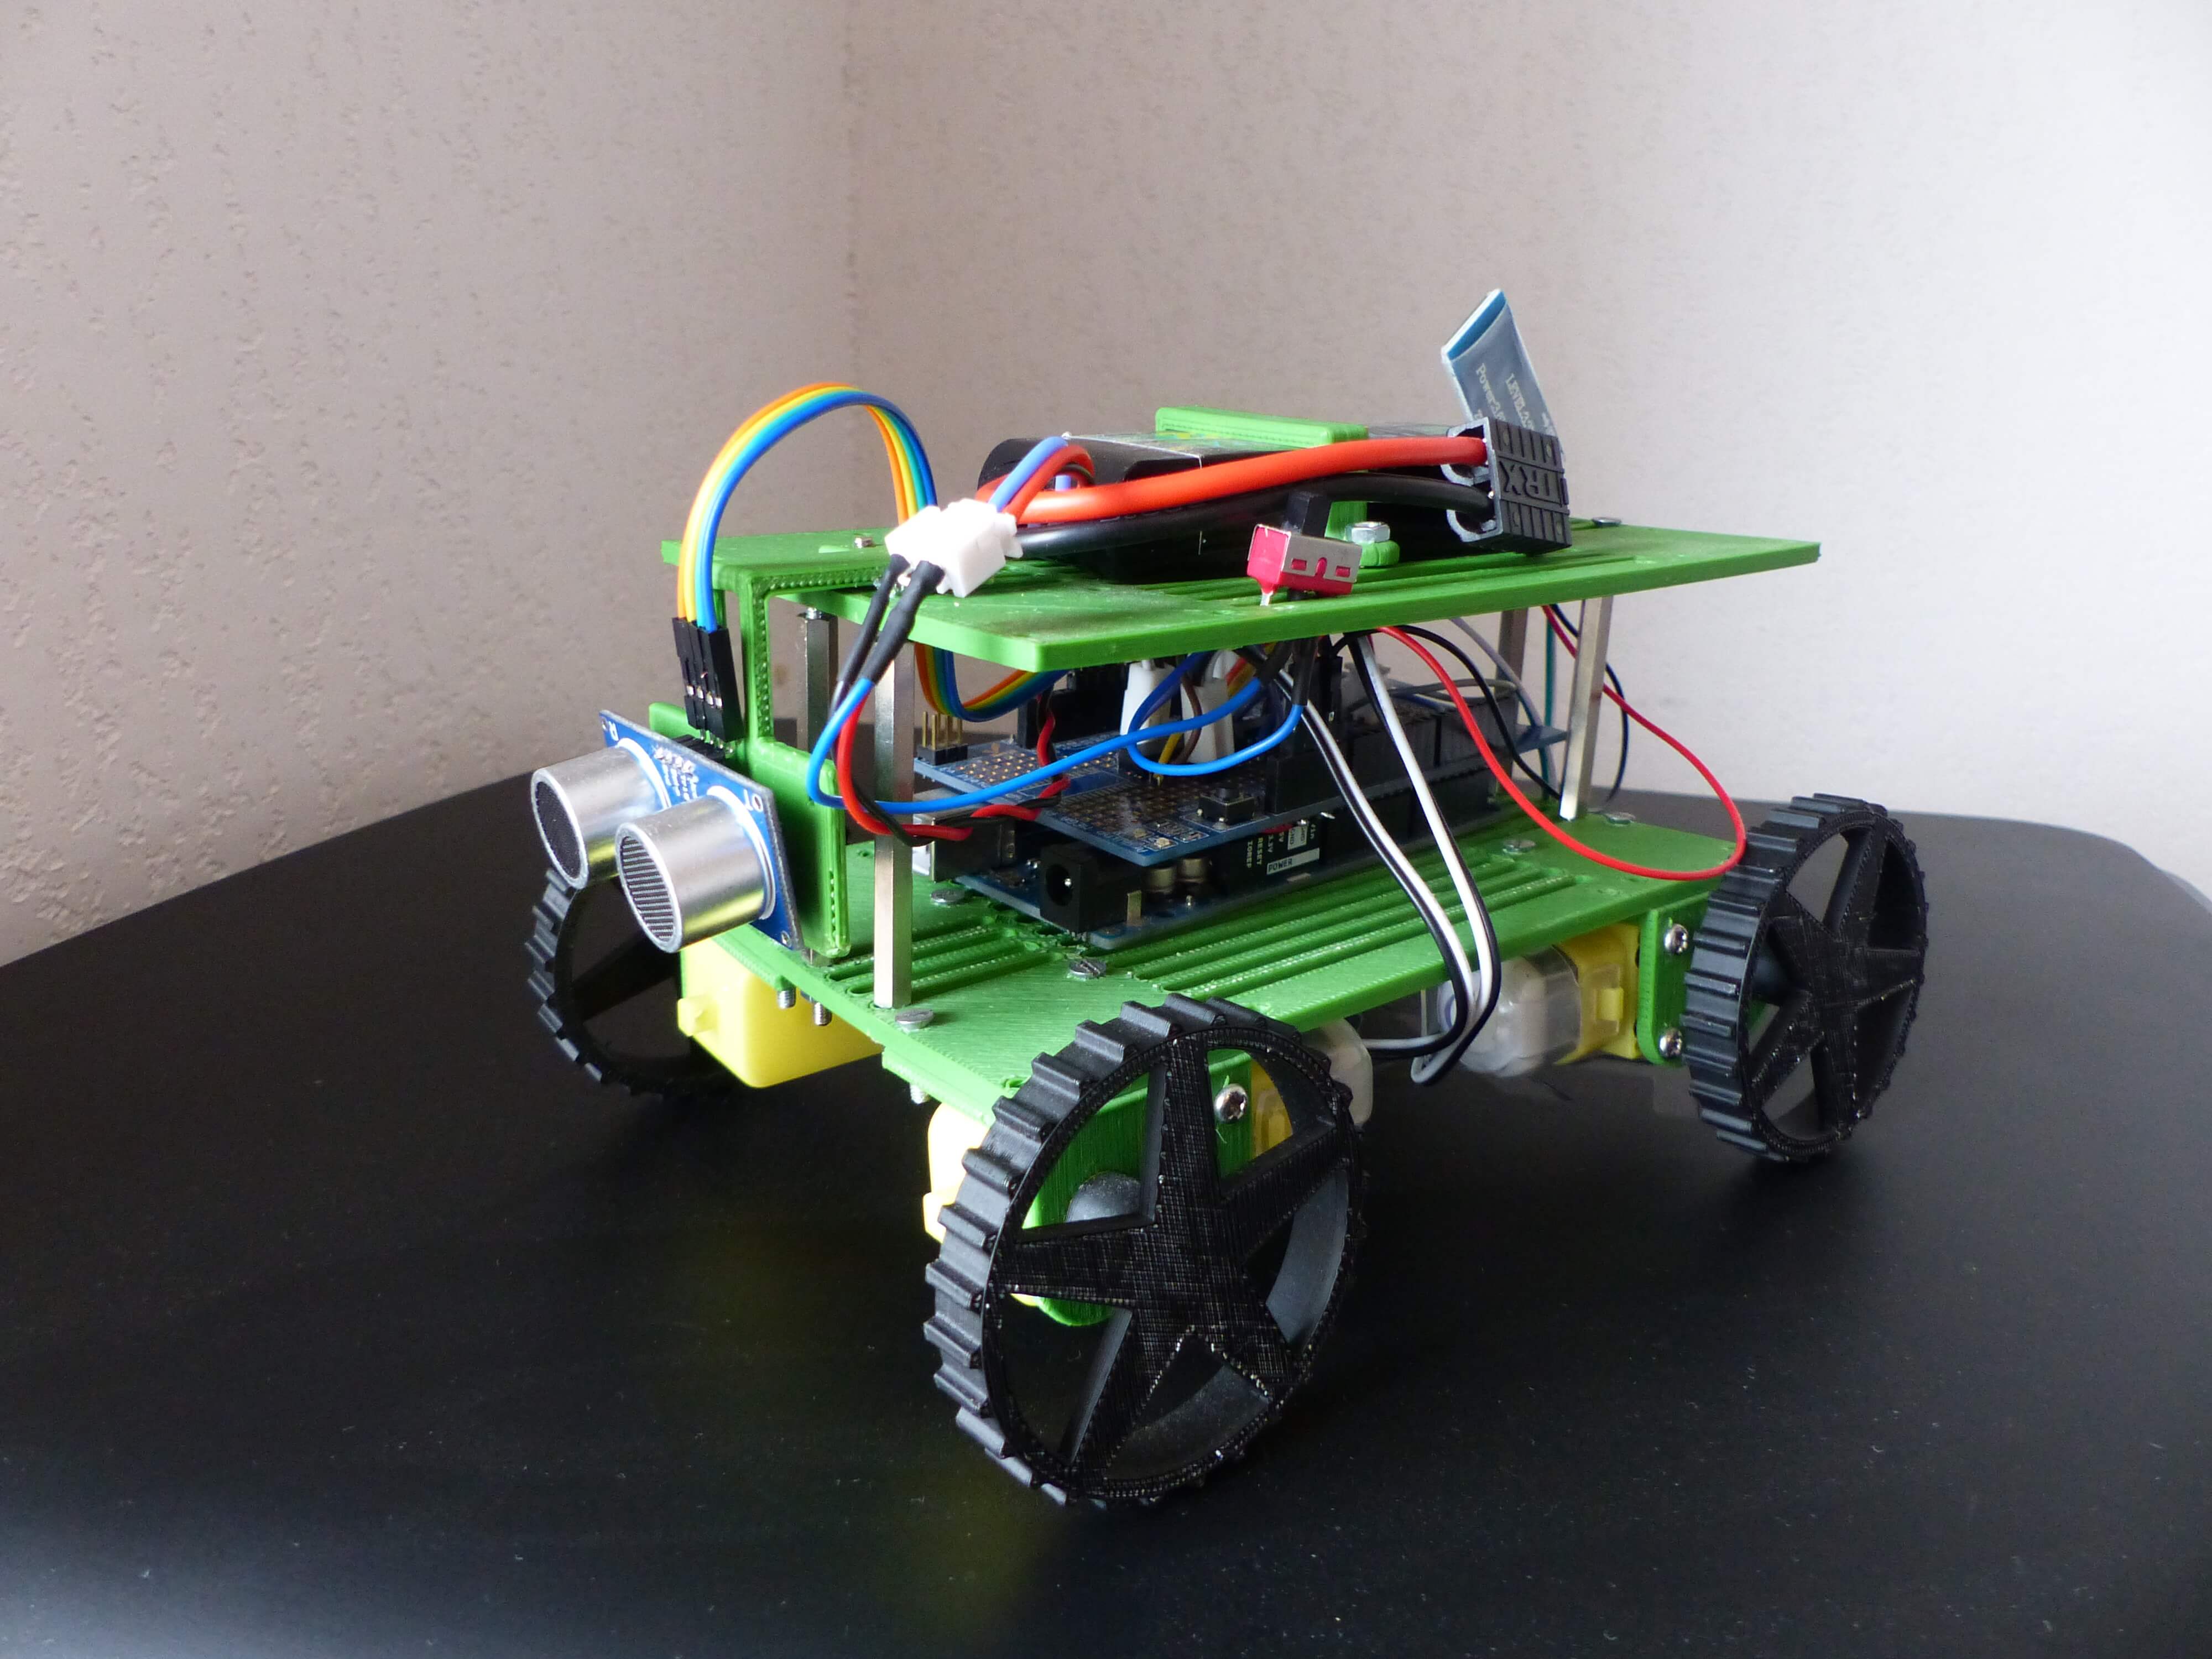 autonomous robot rovy that can detect and avoid obstacles